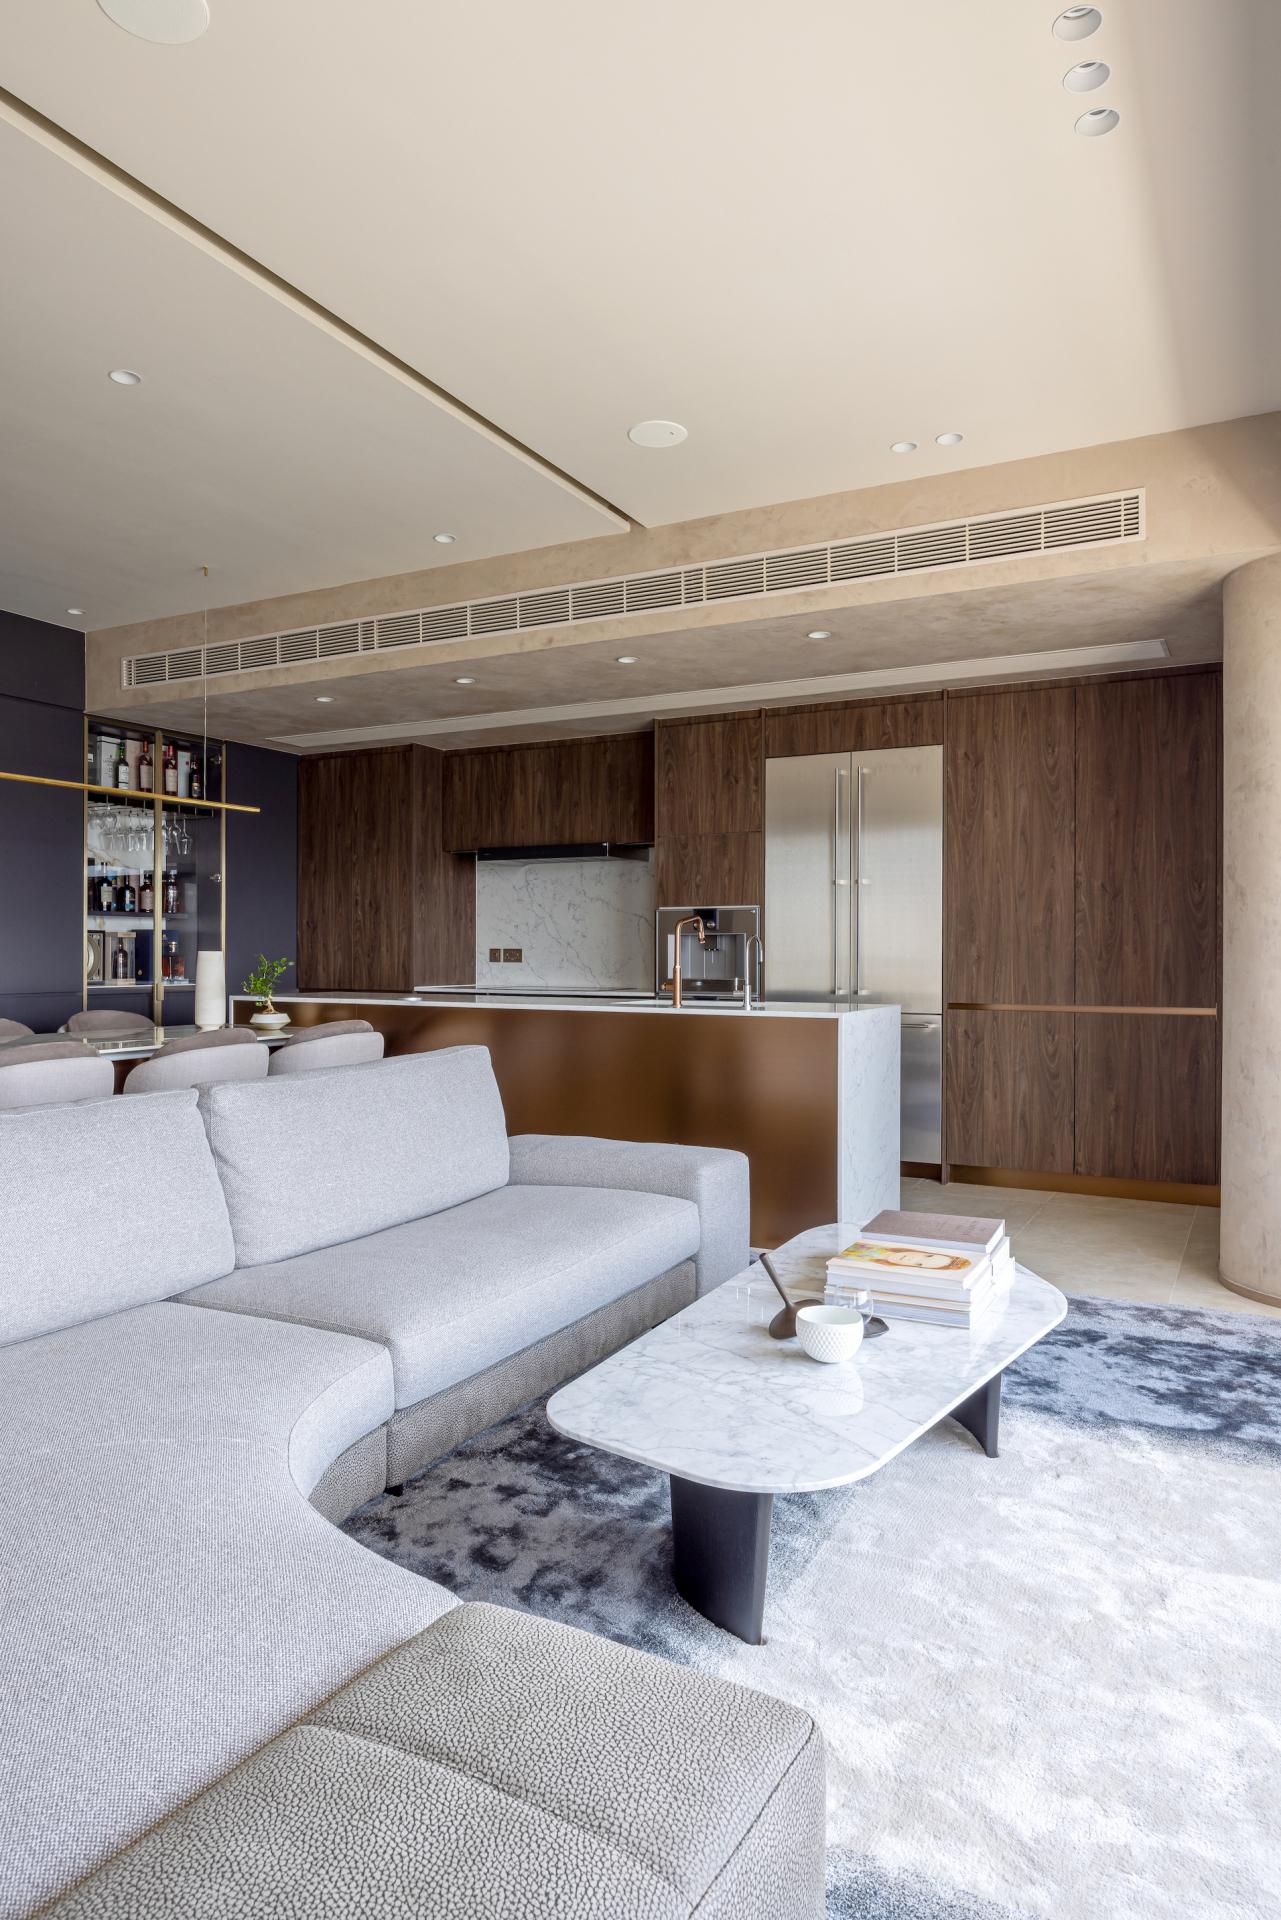 This Chic Hong Kong Couple's 1500 sq. ft. Home Boasts Breathtaking Victoria Harbour Views